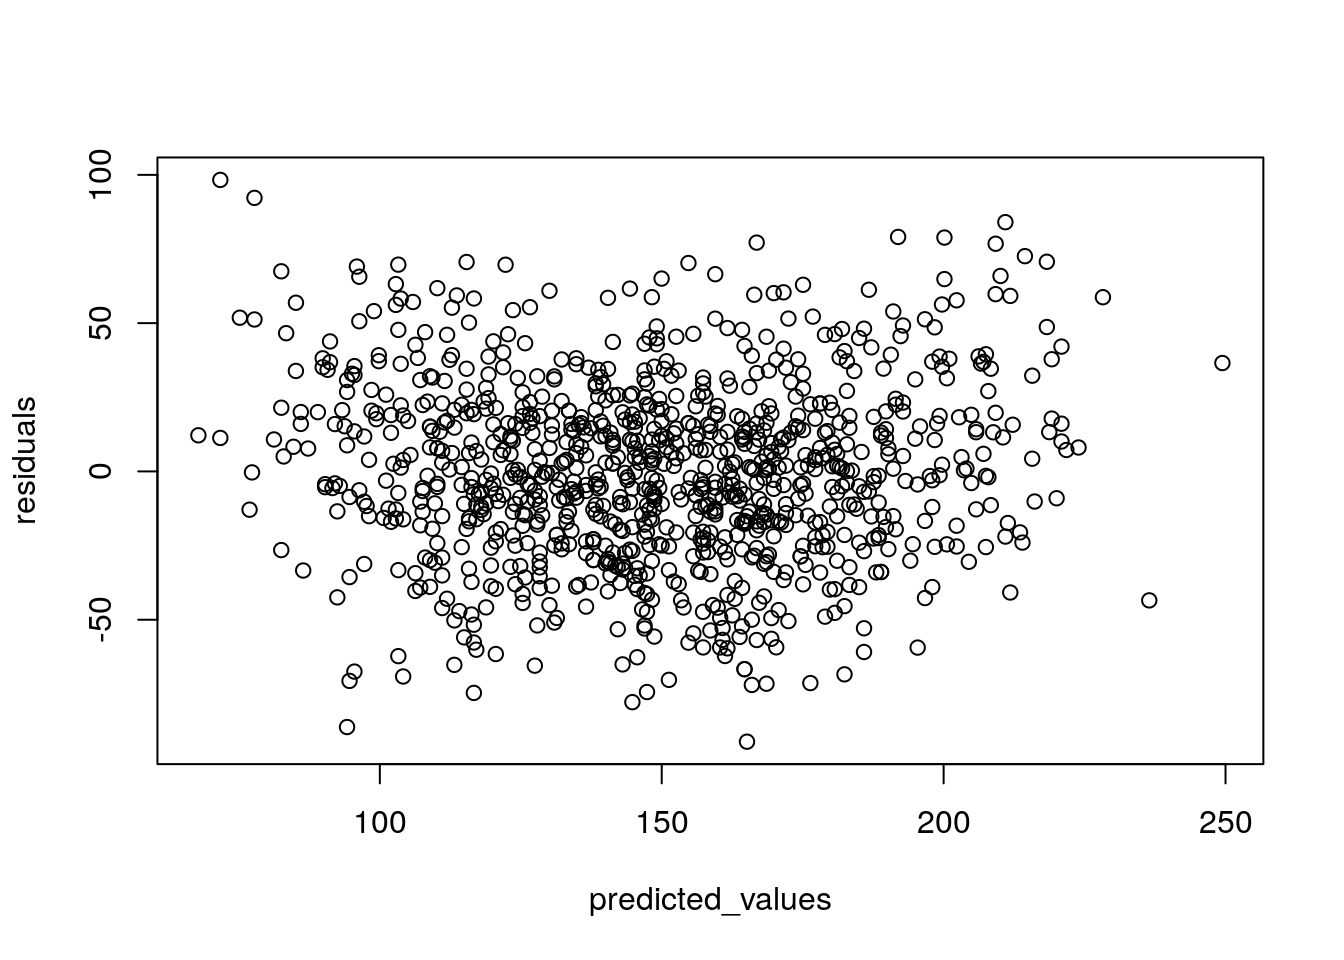 Plot of residuals against fitted/predicted scores